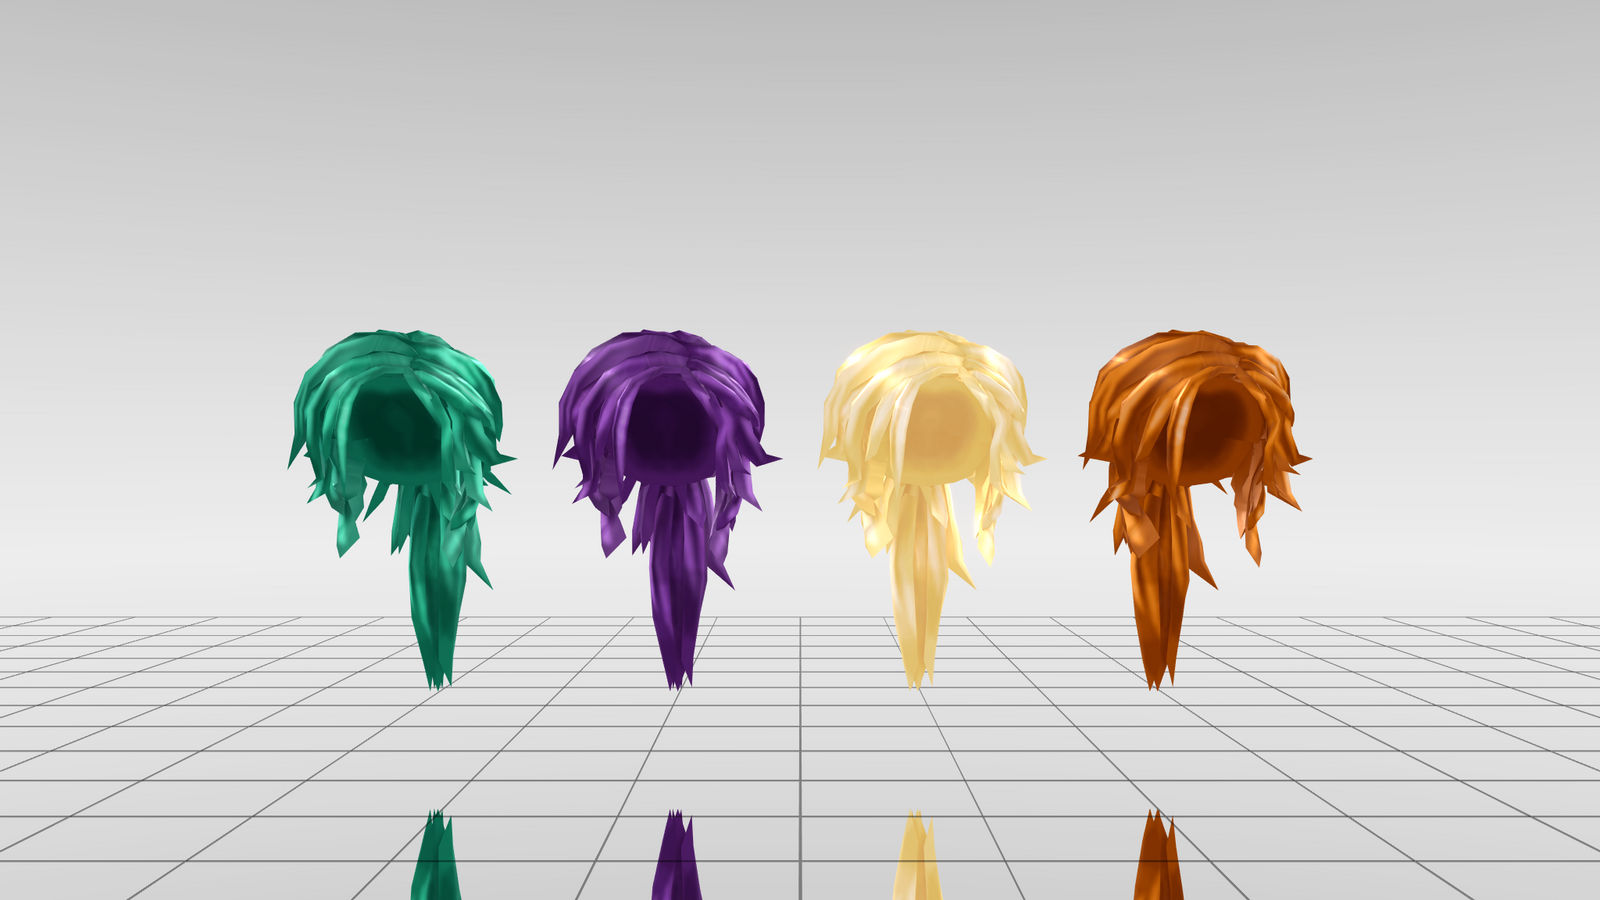 Mmd Roblox Ponytail Hair Dl By Ona2000 On Deviantart - roblox hair model